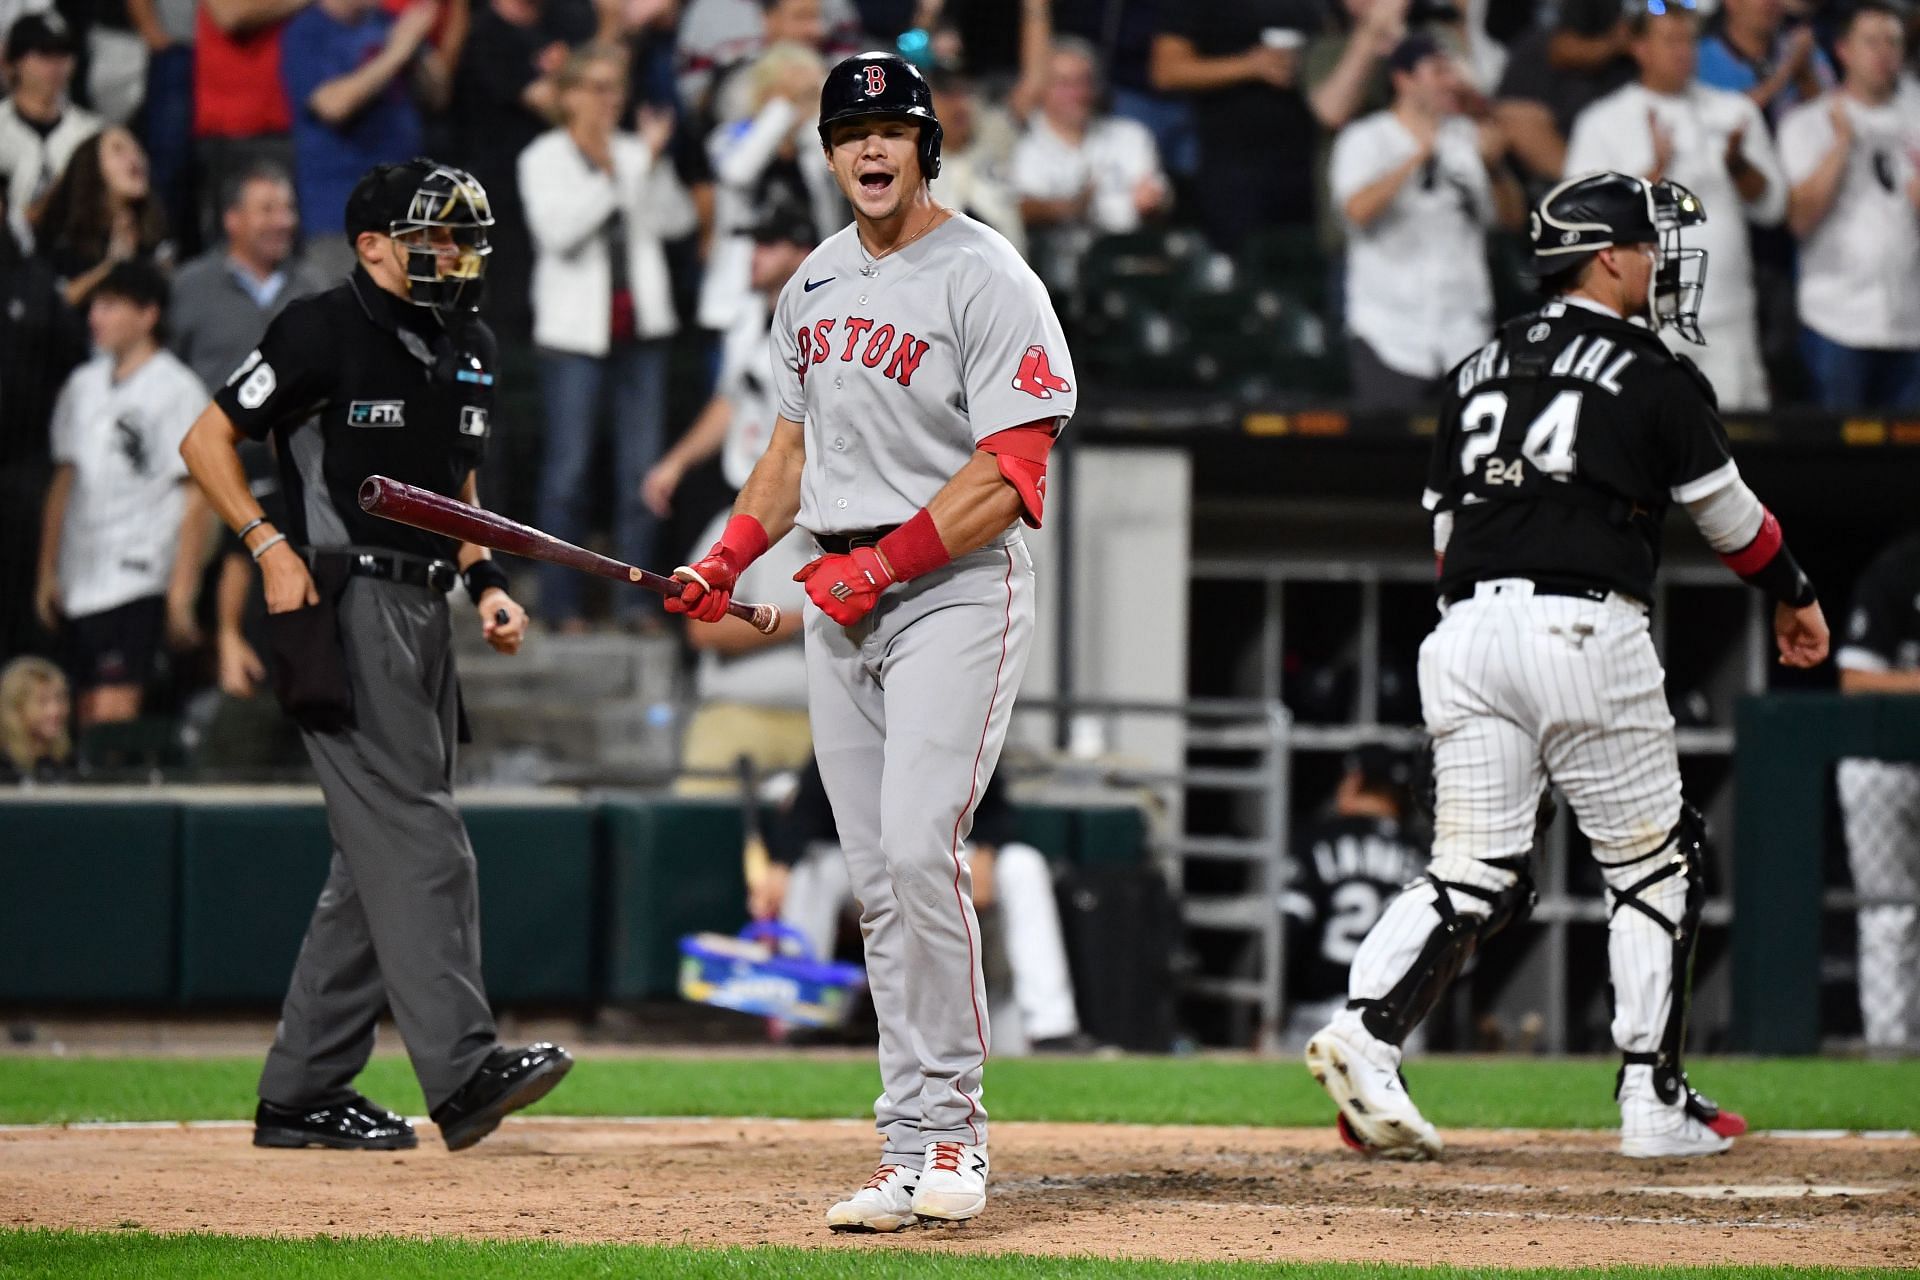 Both the Boston Red Sox and the Chicago White Sox will be looking to find some traction in their upcoming series.